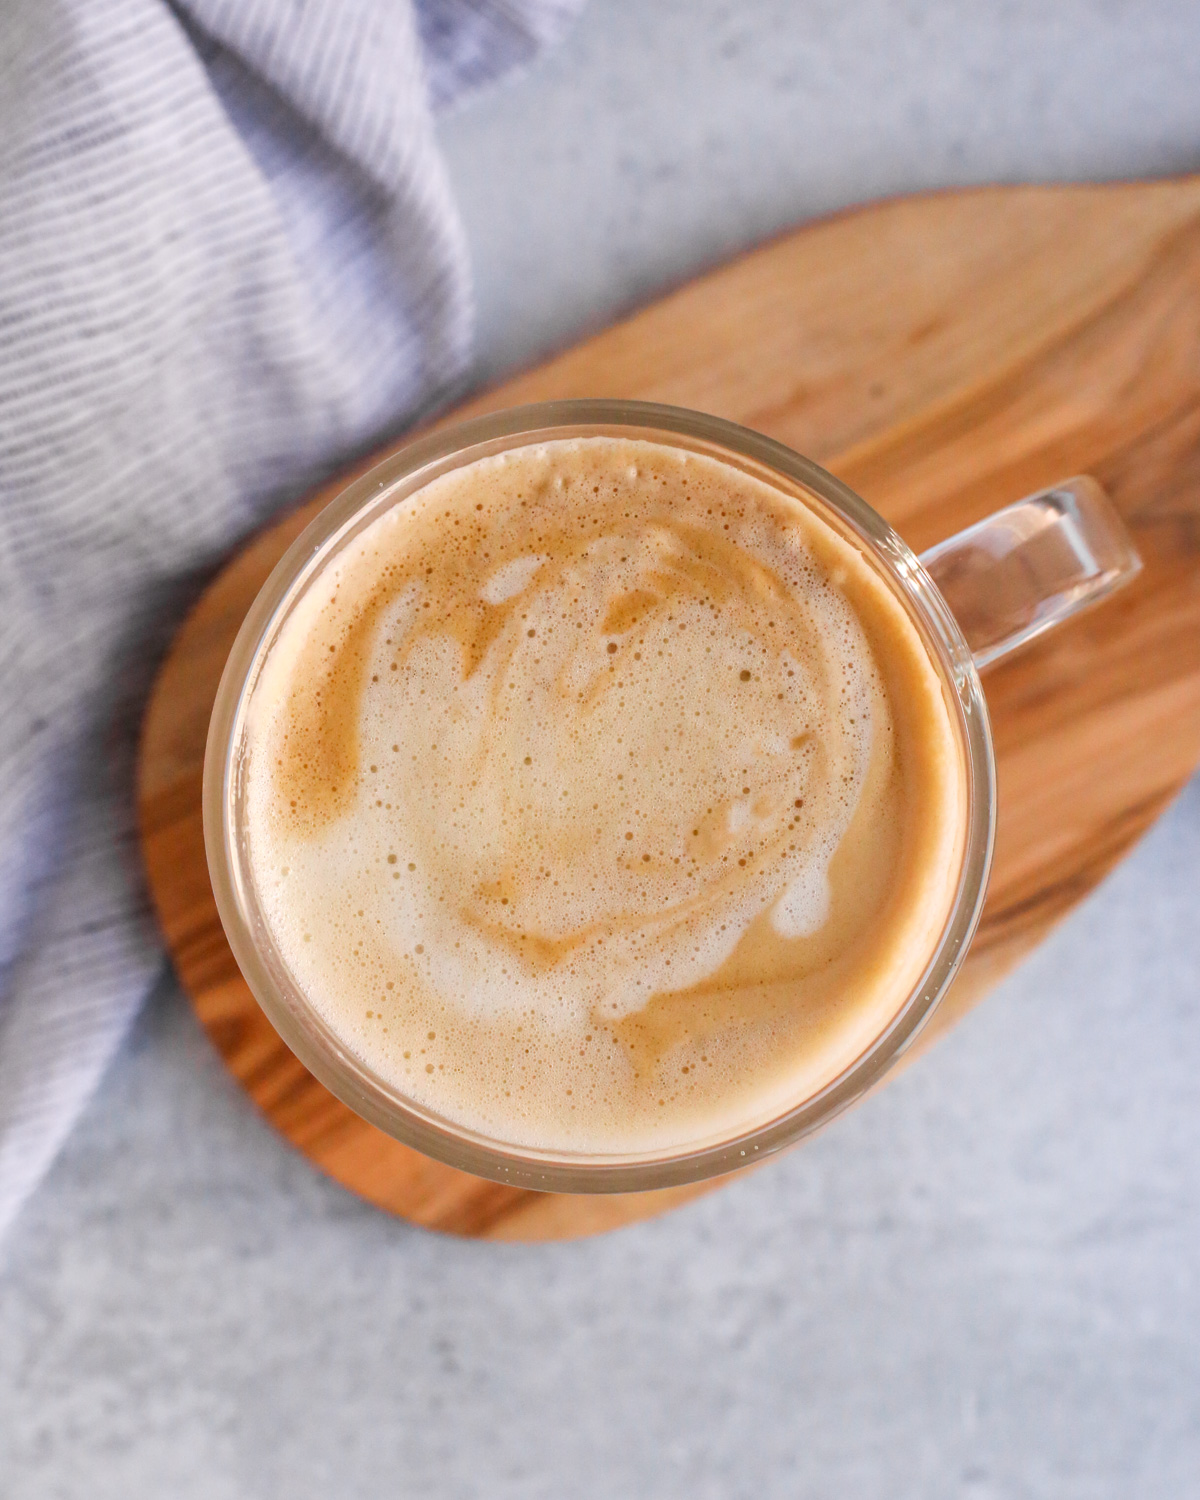 Overhead view of an olive oil latte in a clear glass mug, showing a creamy and luxuriously smooth texture 